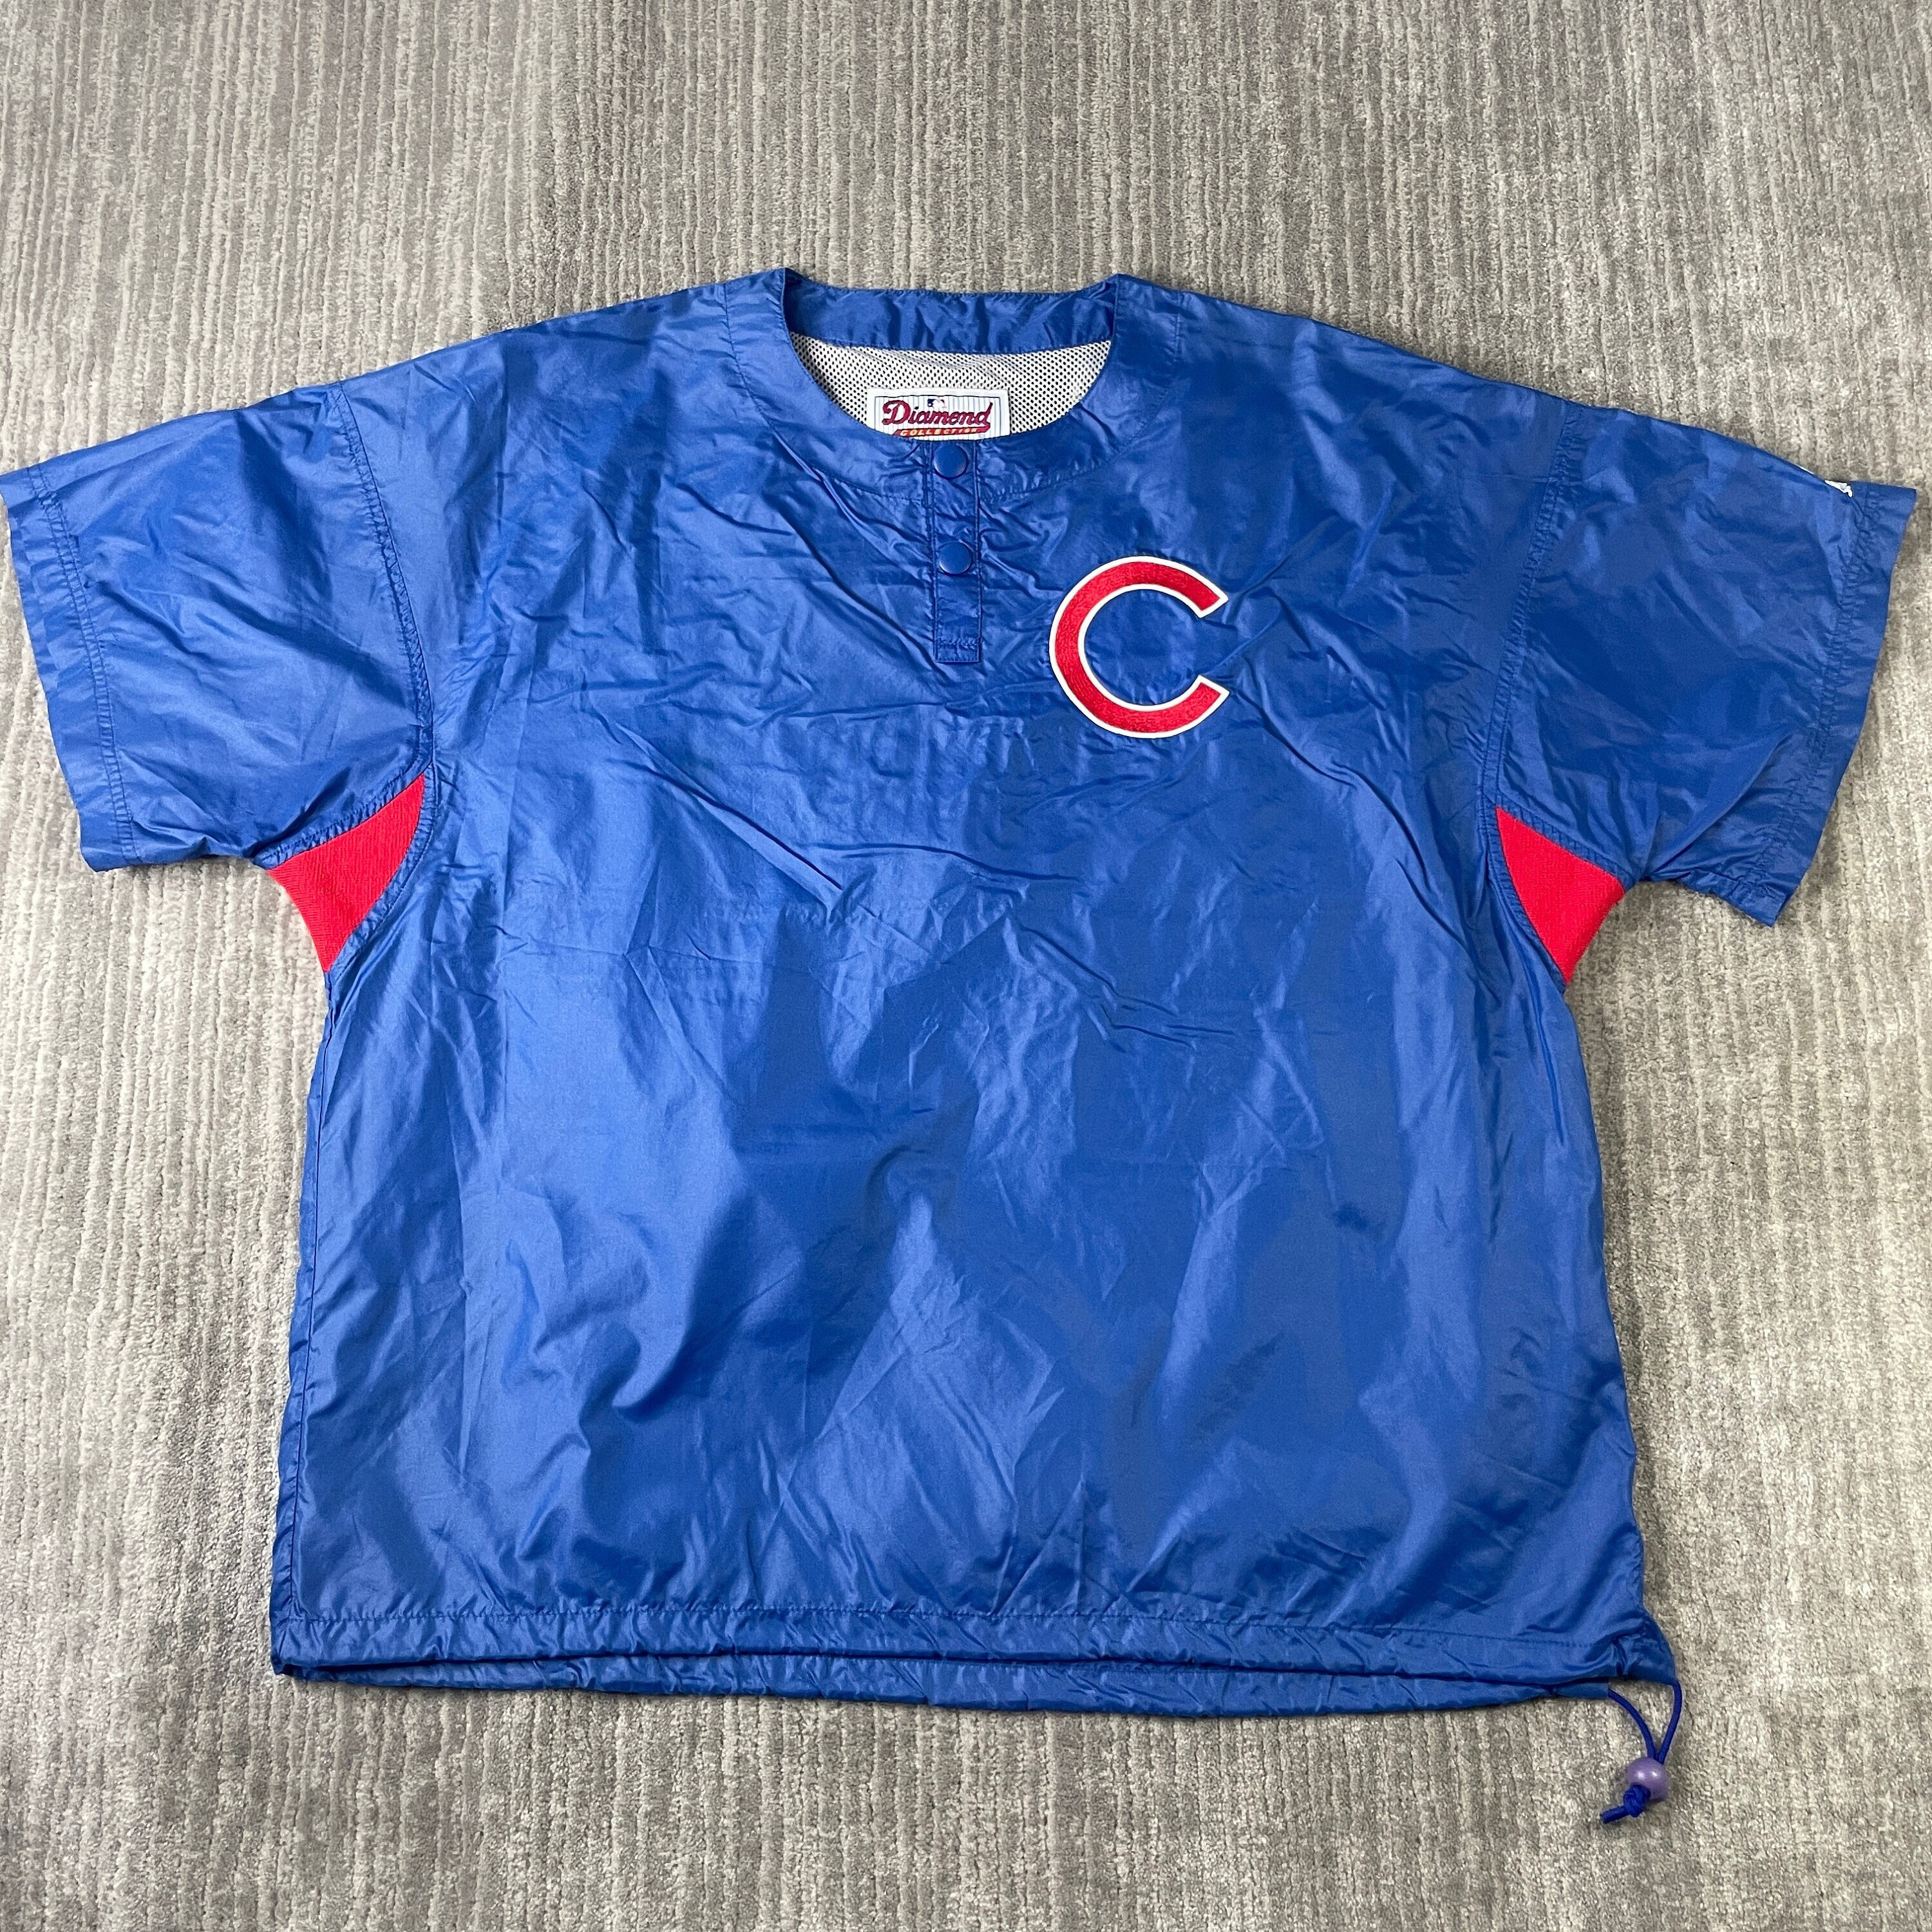 VTG Chicago Cubs MAJESTIC Patched Blue Pullover Shirt Jersey SZ M - Cool